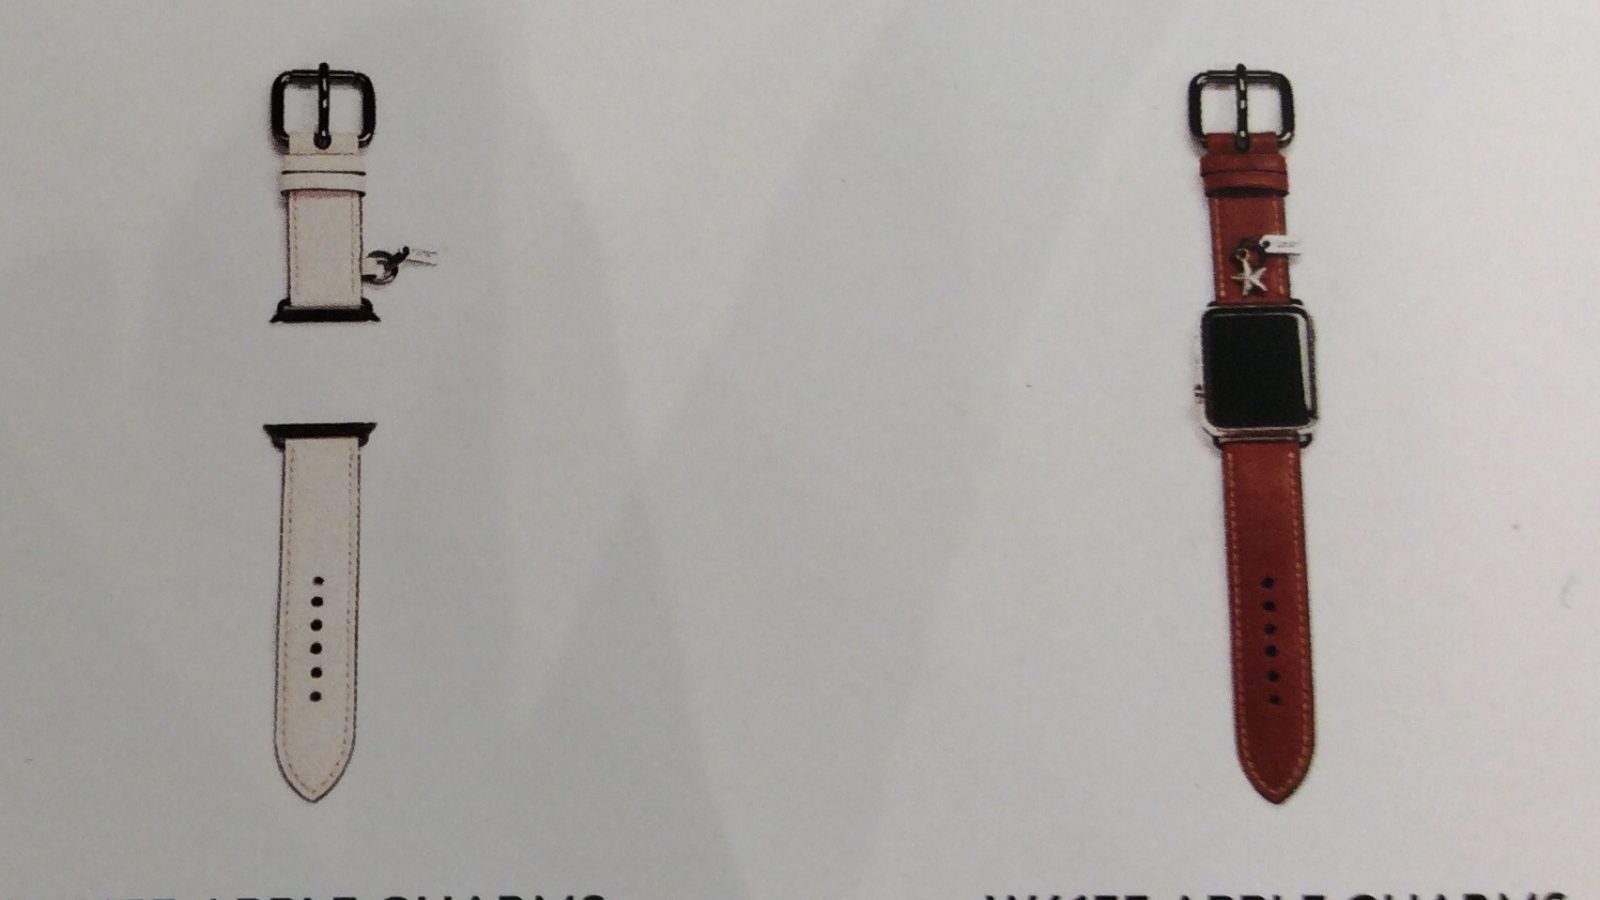 Designer Apple Watch bands by Coach reportedly coming soon for around $150  [Photos] - 9to5Mac